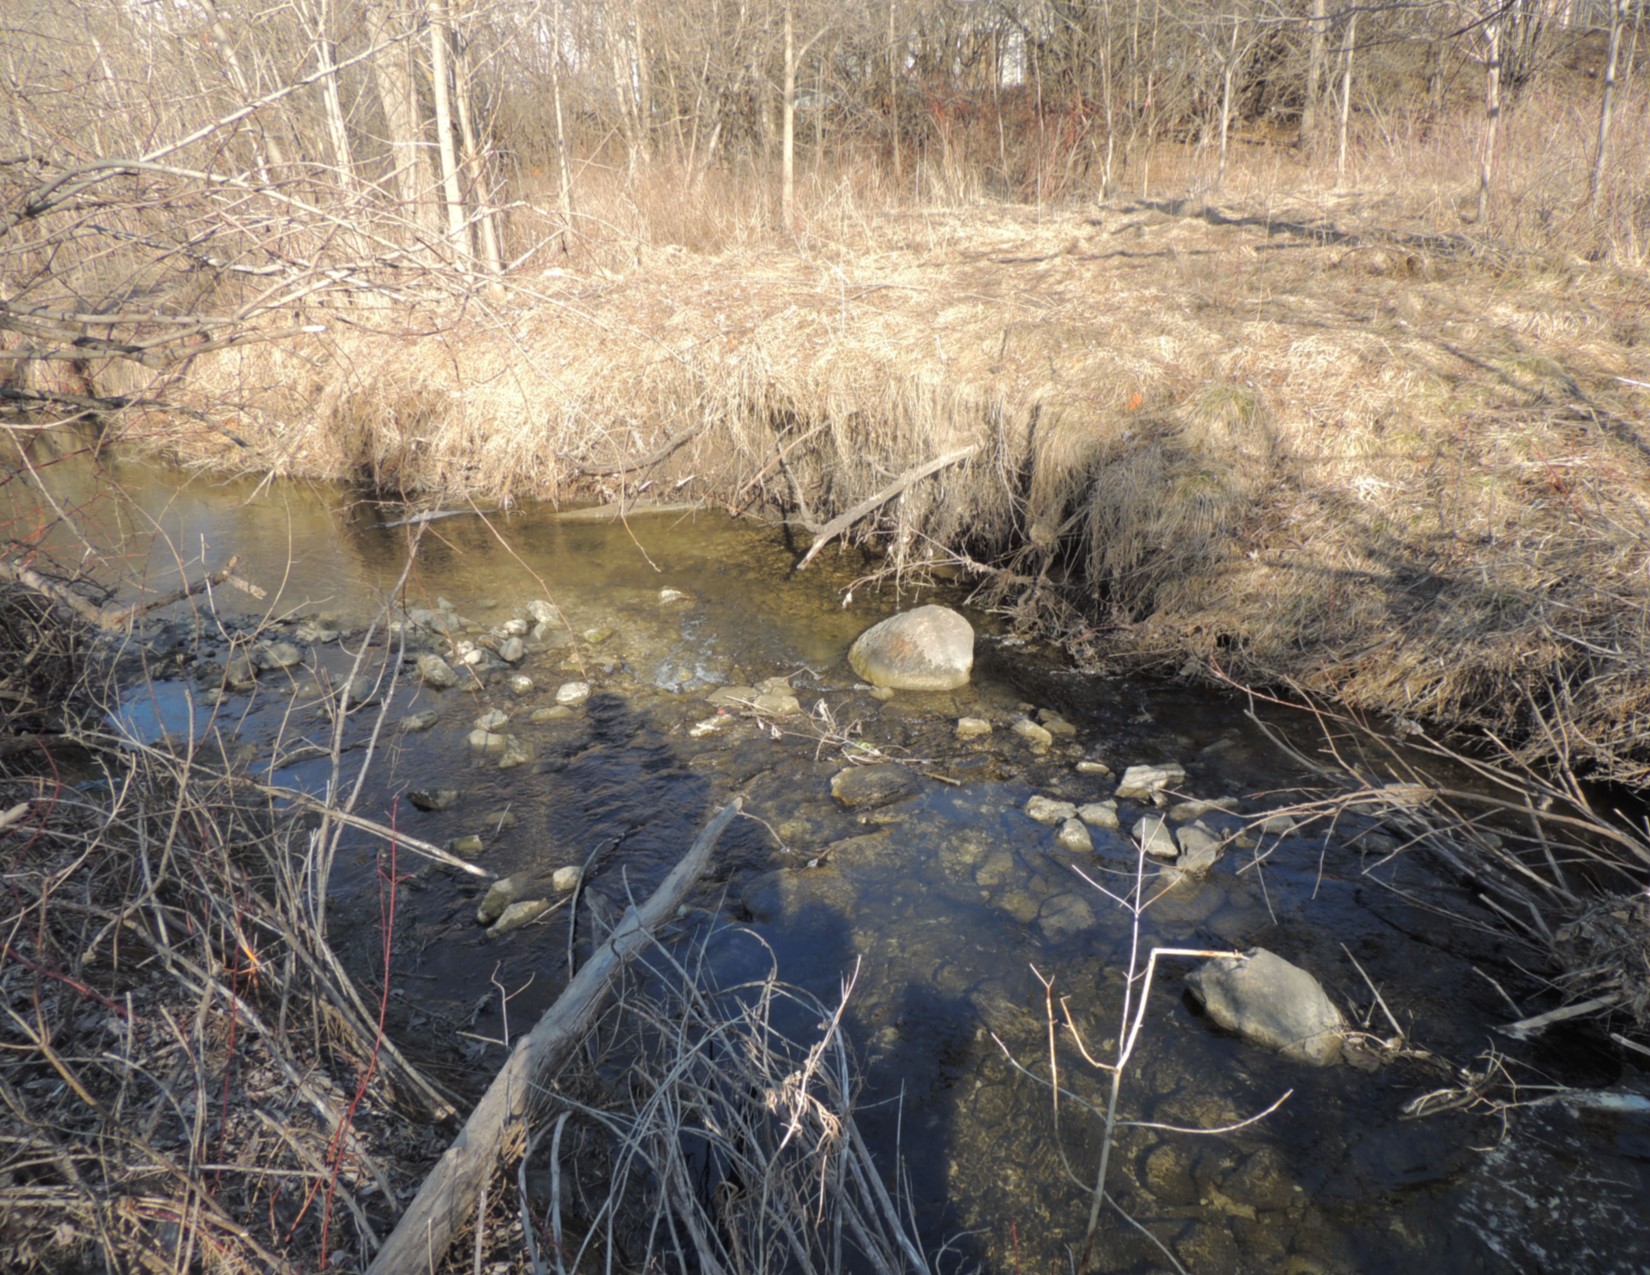 Erosion at Site I-070 where the sanitary line crosses the watercourse and is at risk of exposure.